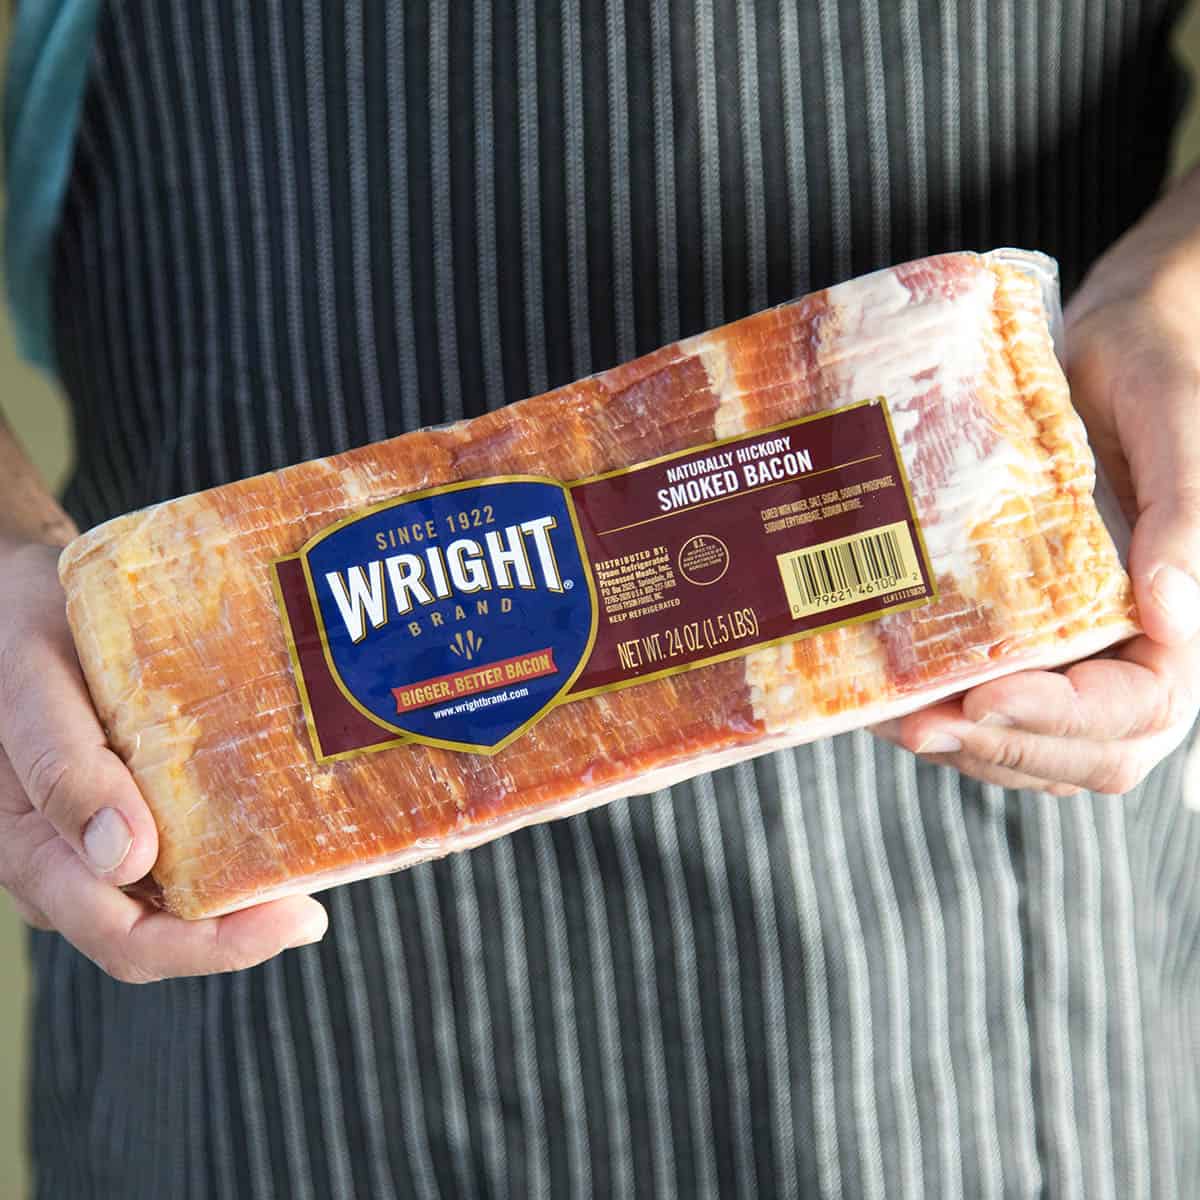 Wright Brand Bacon in hands.